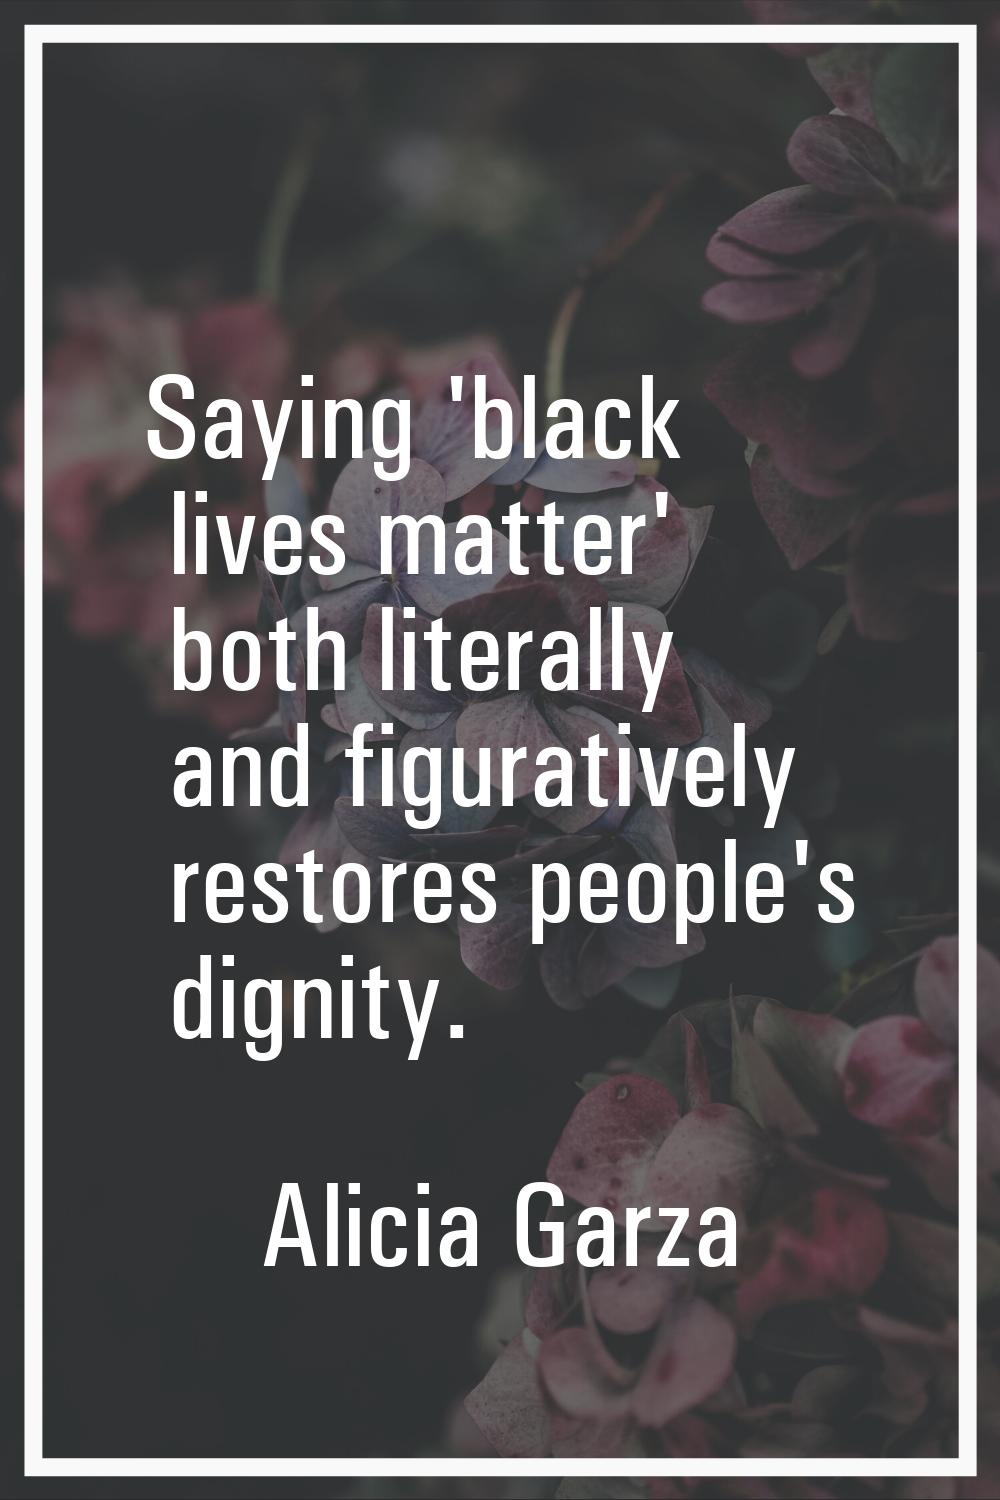 Saying 'black lives matter' both literally and figuratively restores people's dignity.